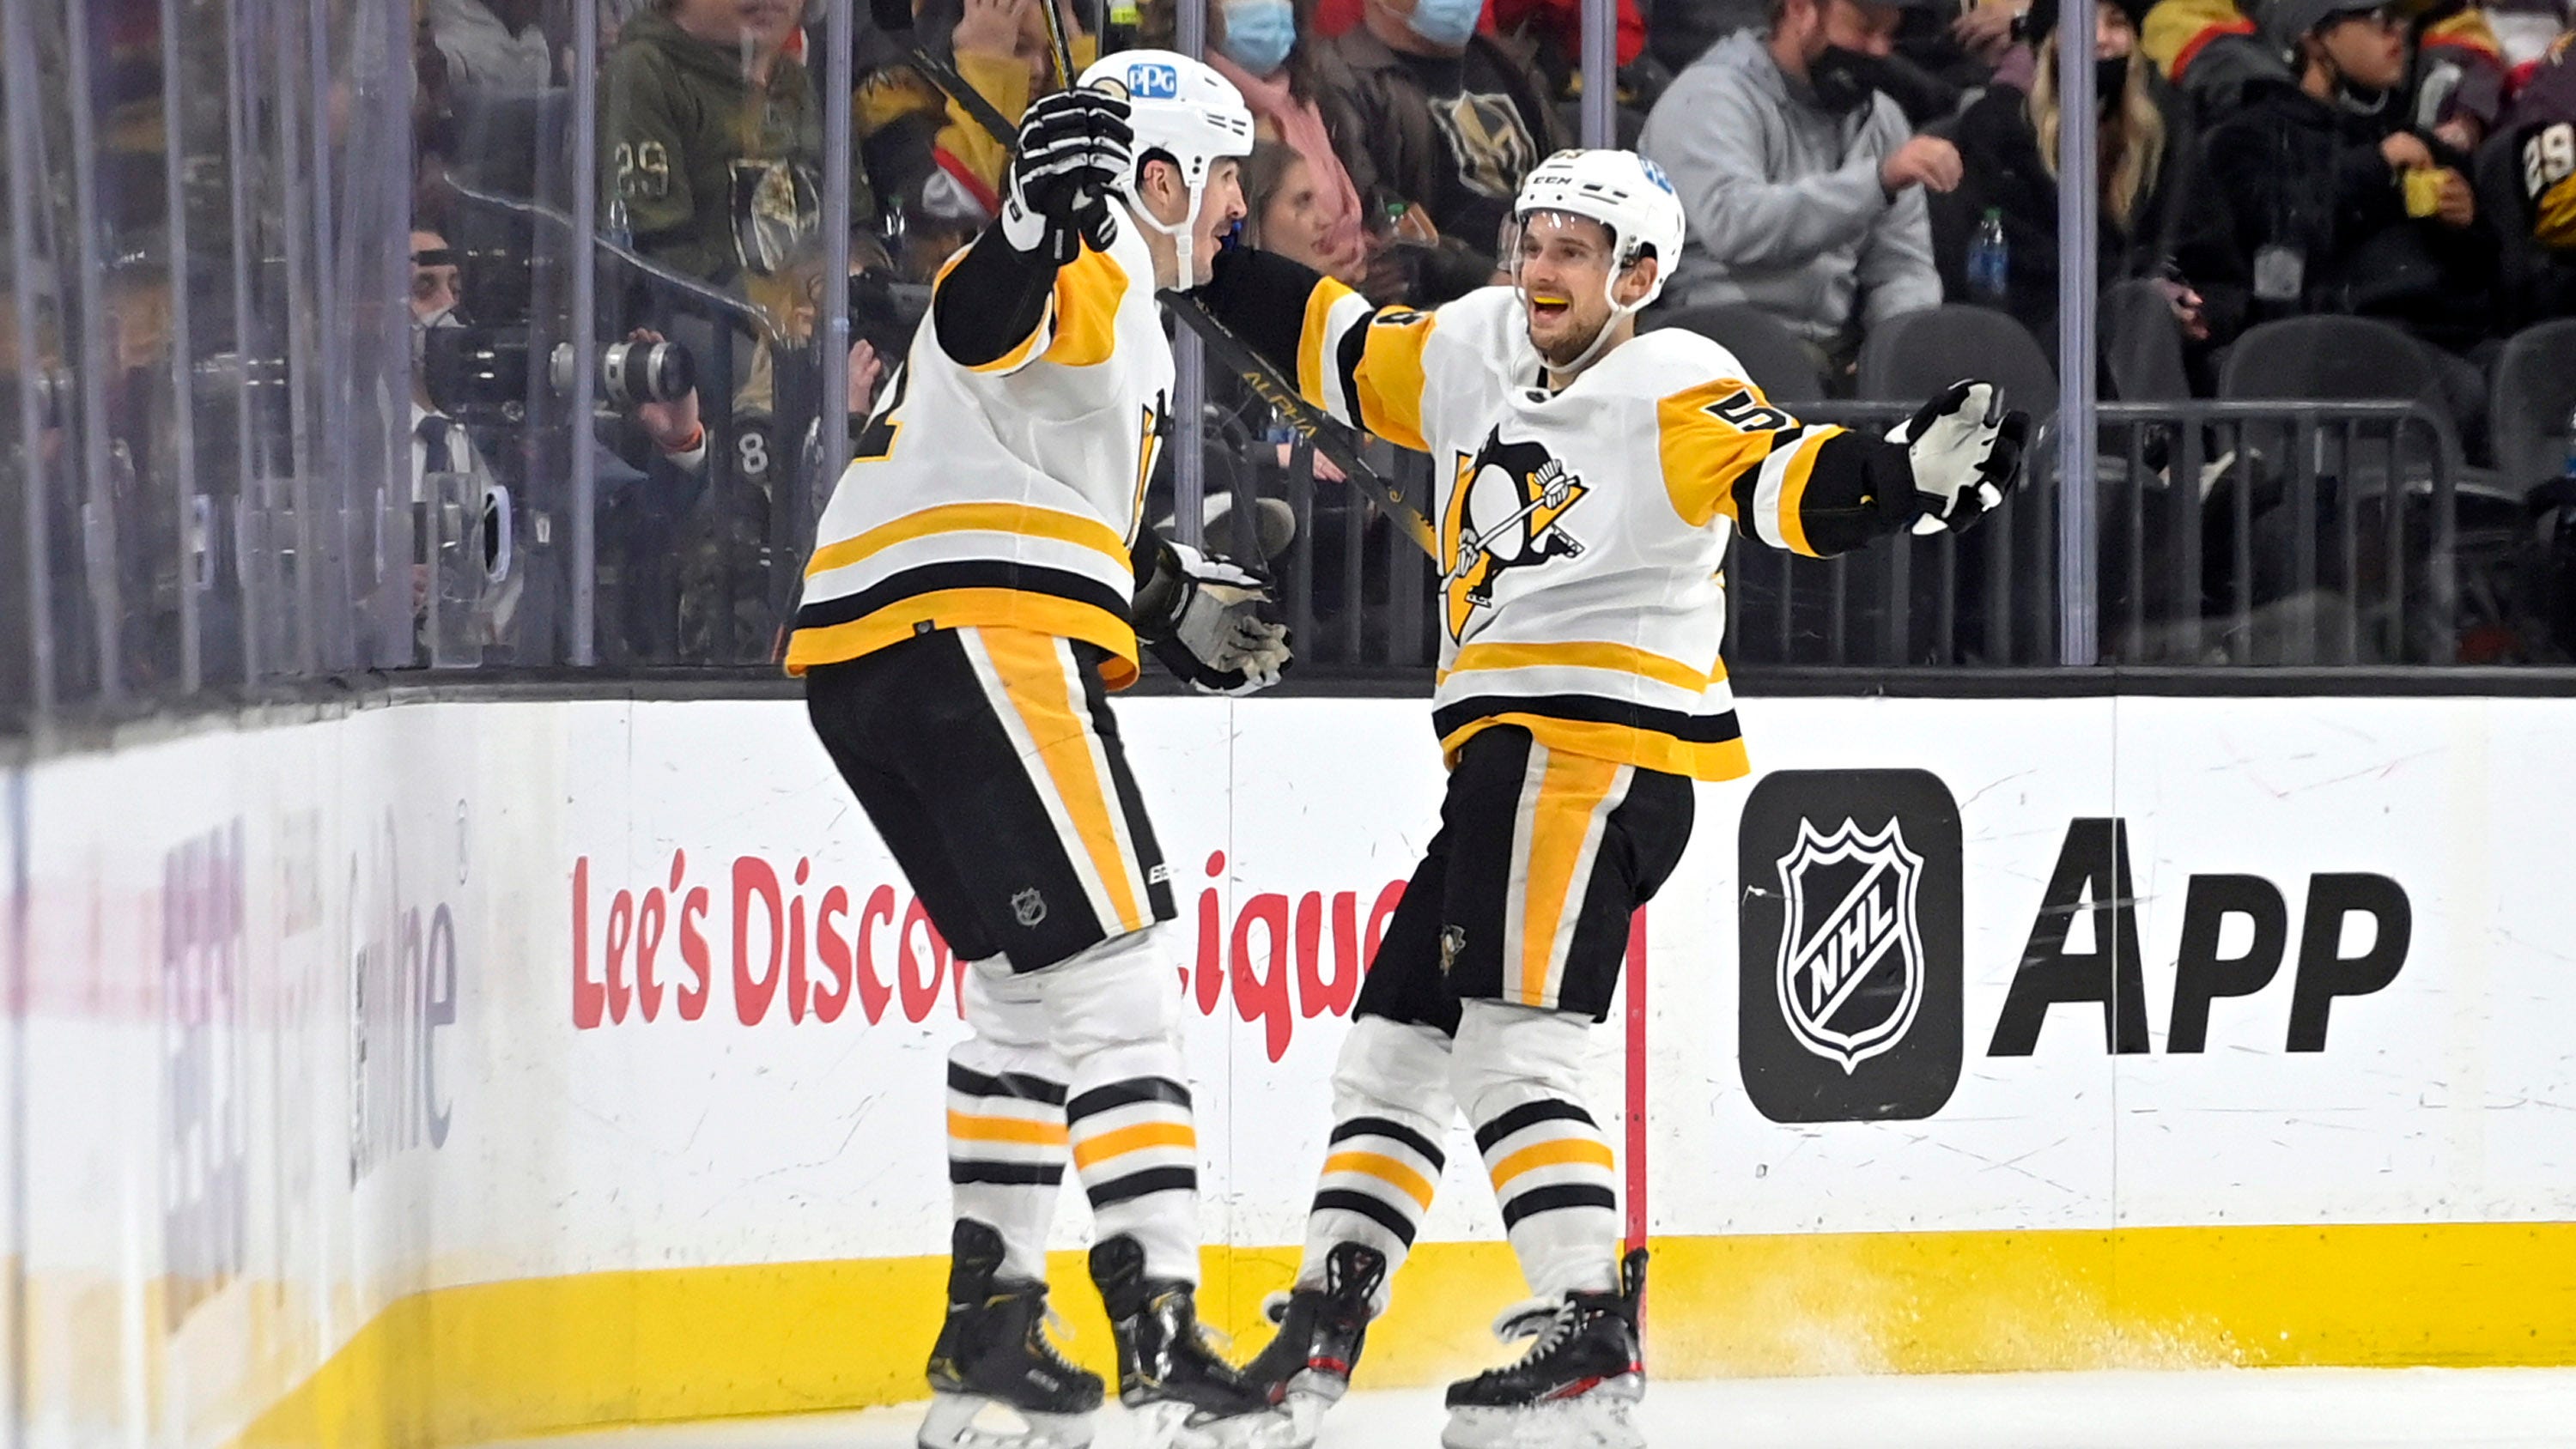 Penguins score 5 unanswered goals to rally past Golden Knights 5-3